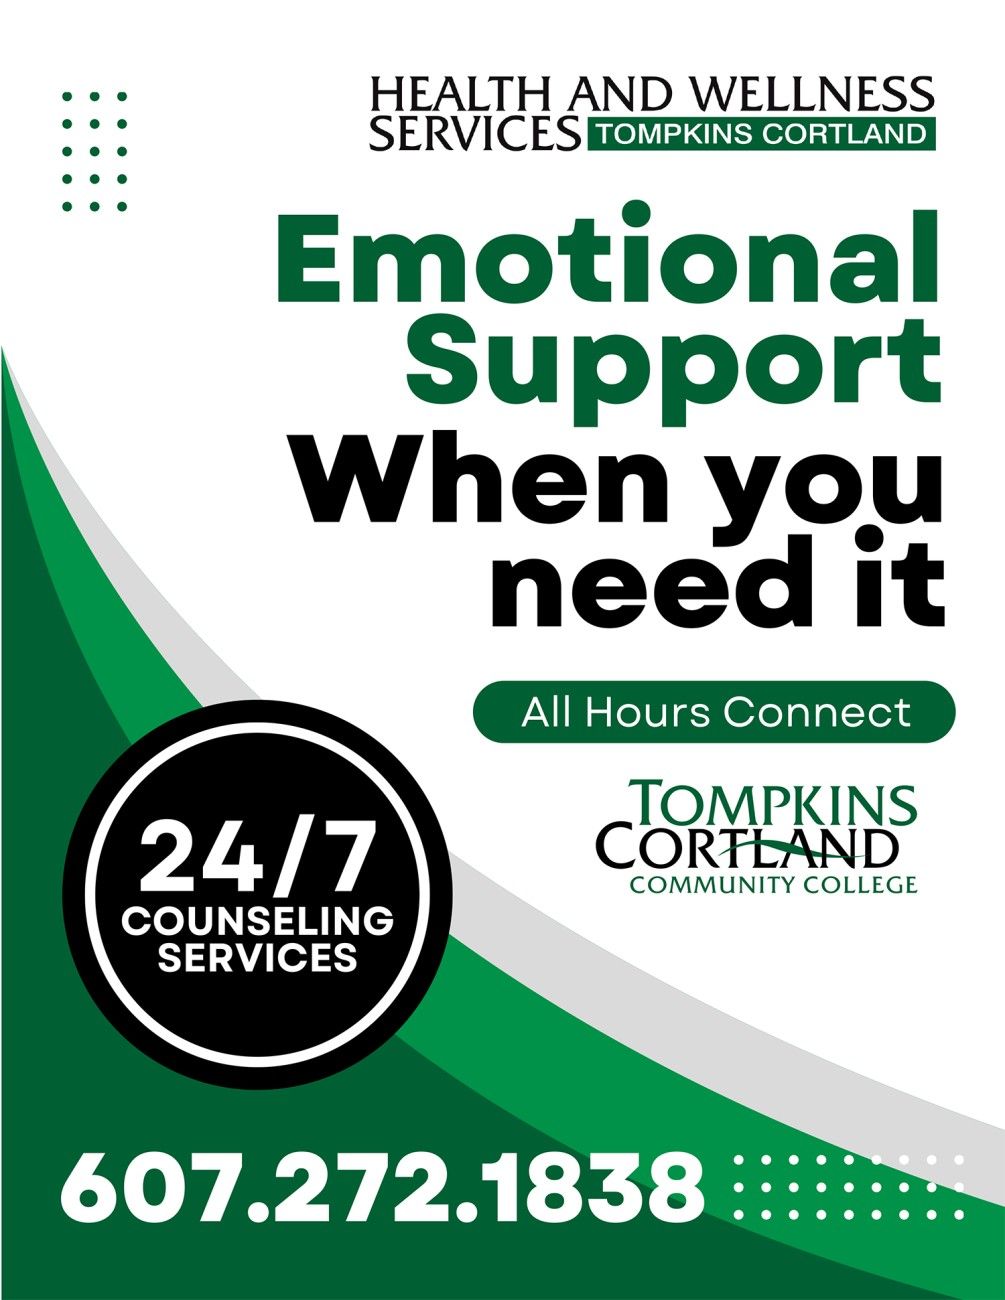 Emotional Support when you need it - All Hours Connect - 607.272.1838